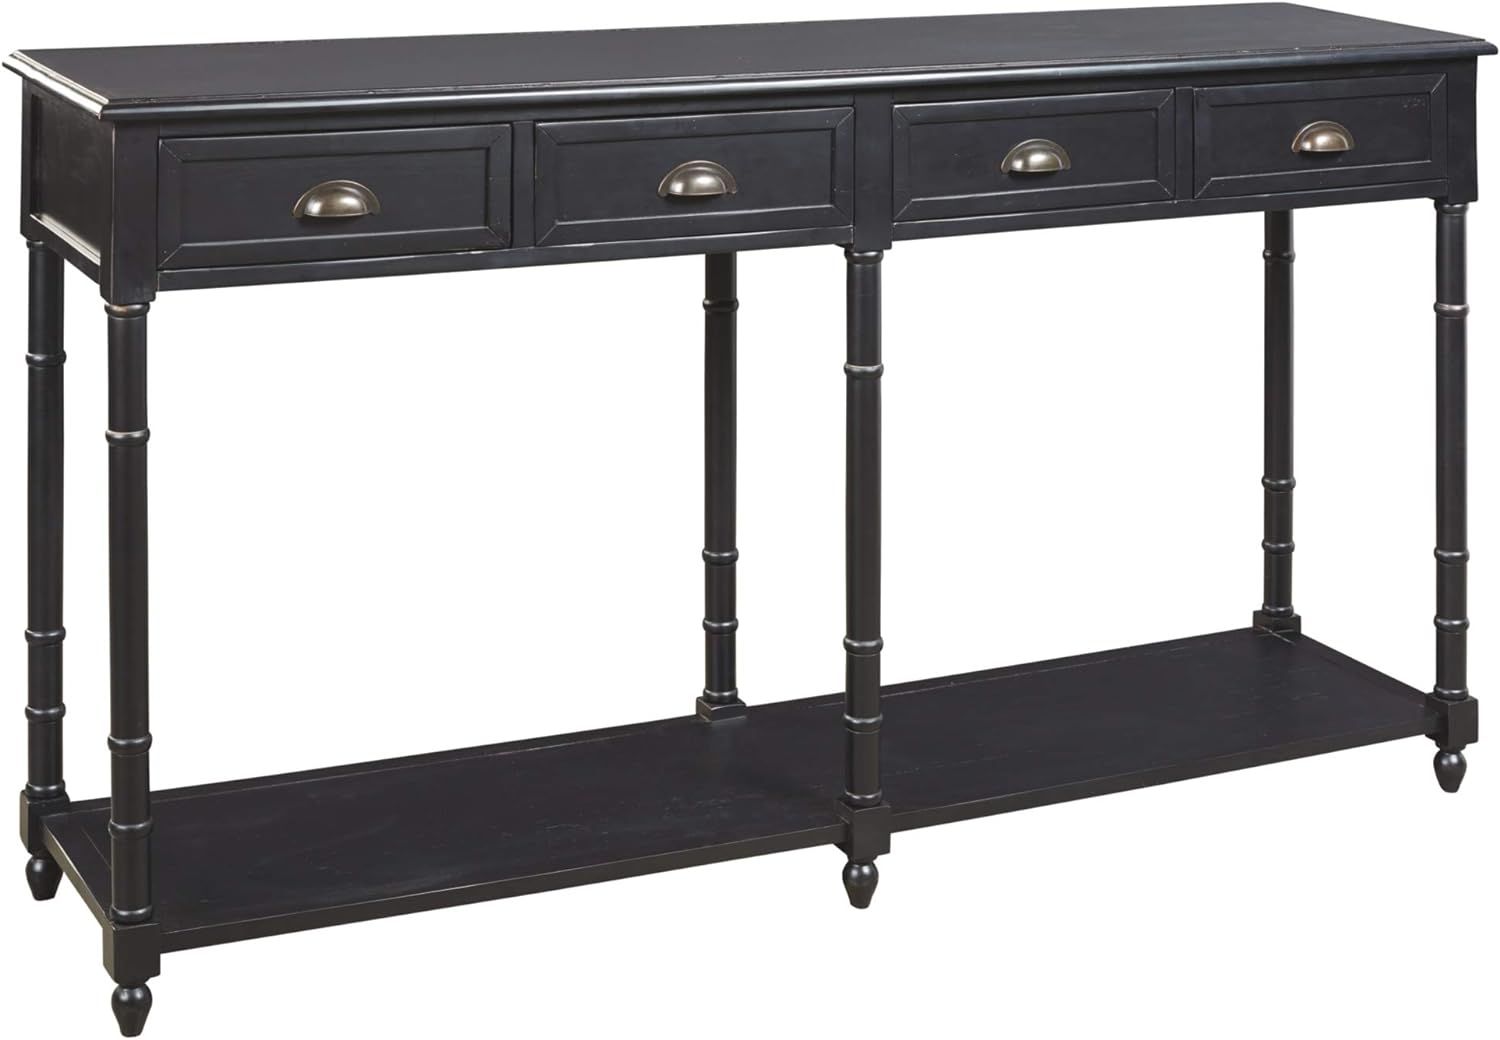 Signature Design by Ashley Eirdale Vintage Casual 4 Drawer Console Sofa Table, Black | Amazon (US)